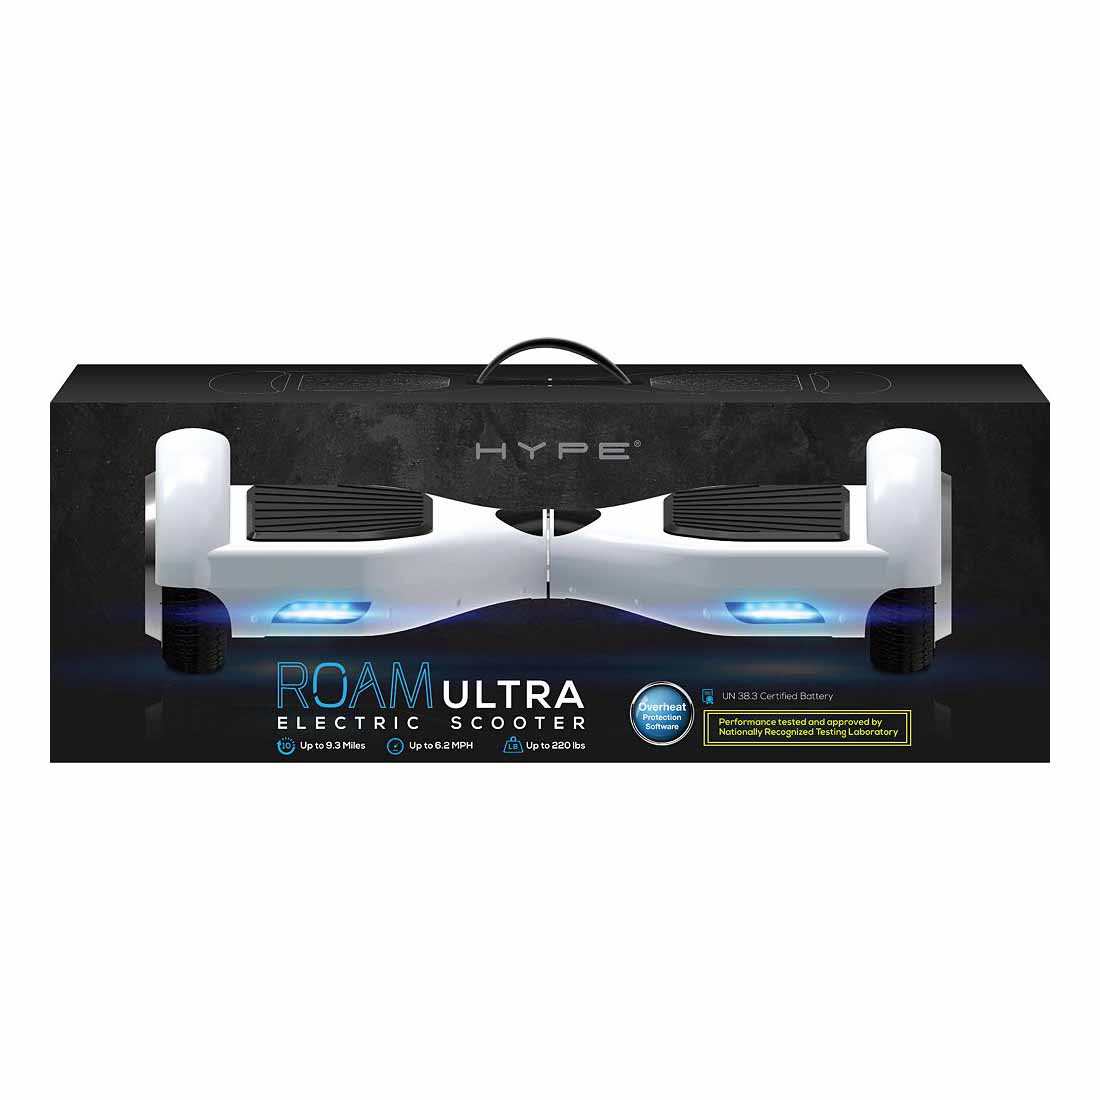 Hover-1 Ultra UL Certified Electric Hoverboard w/ 6.5" Wheels and LED Lights - White - image 3 of 5